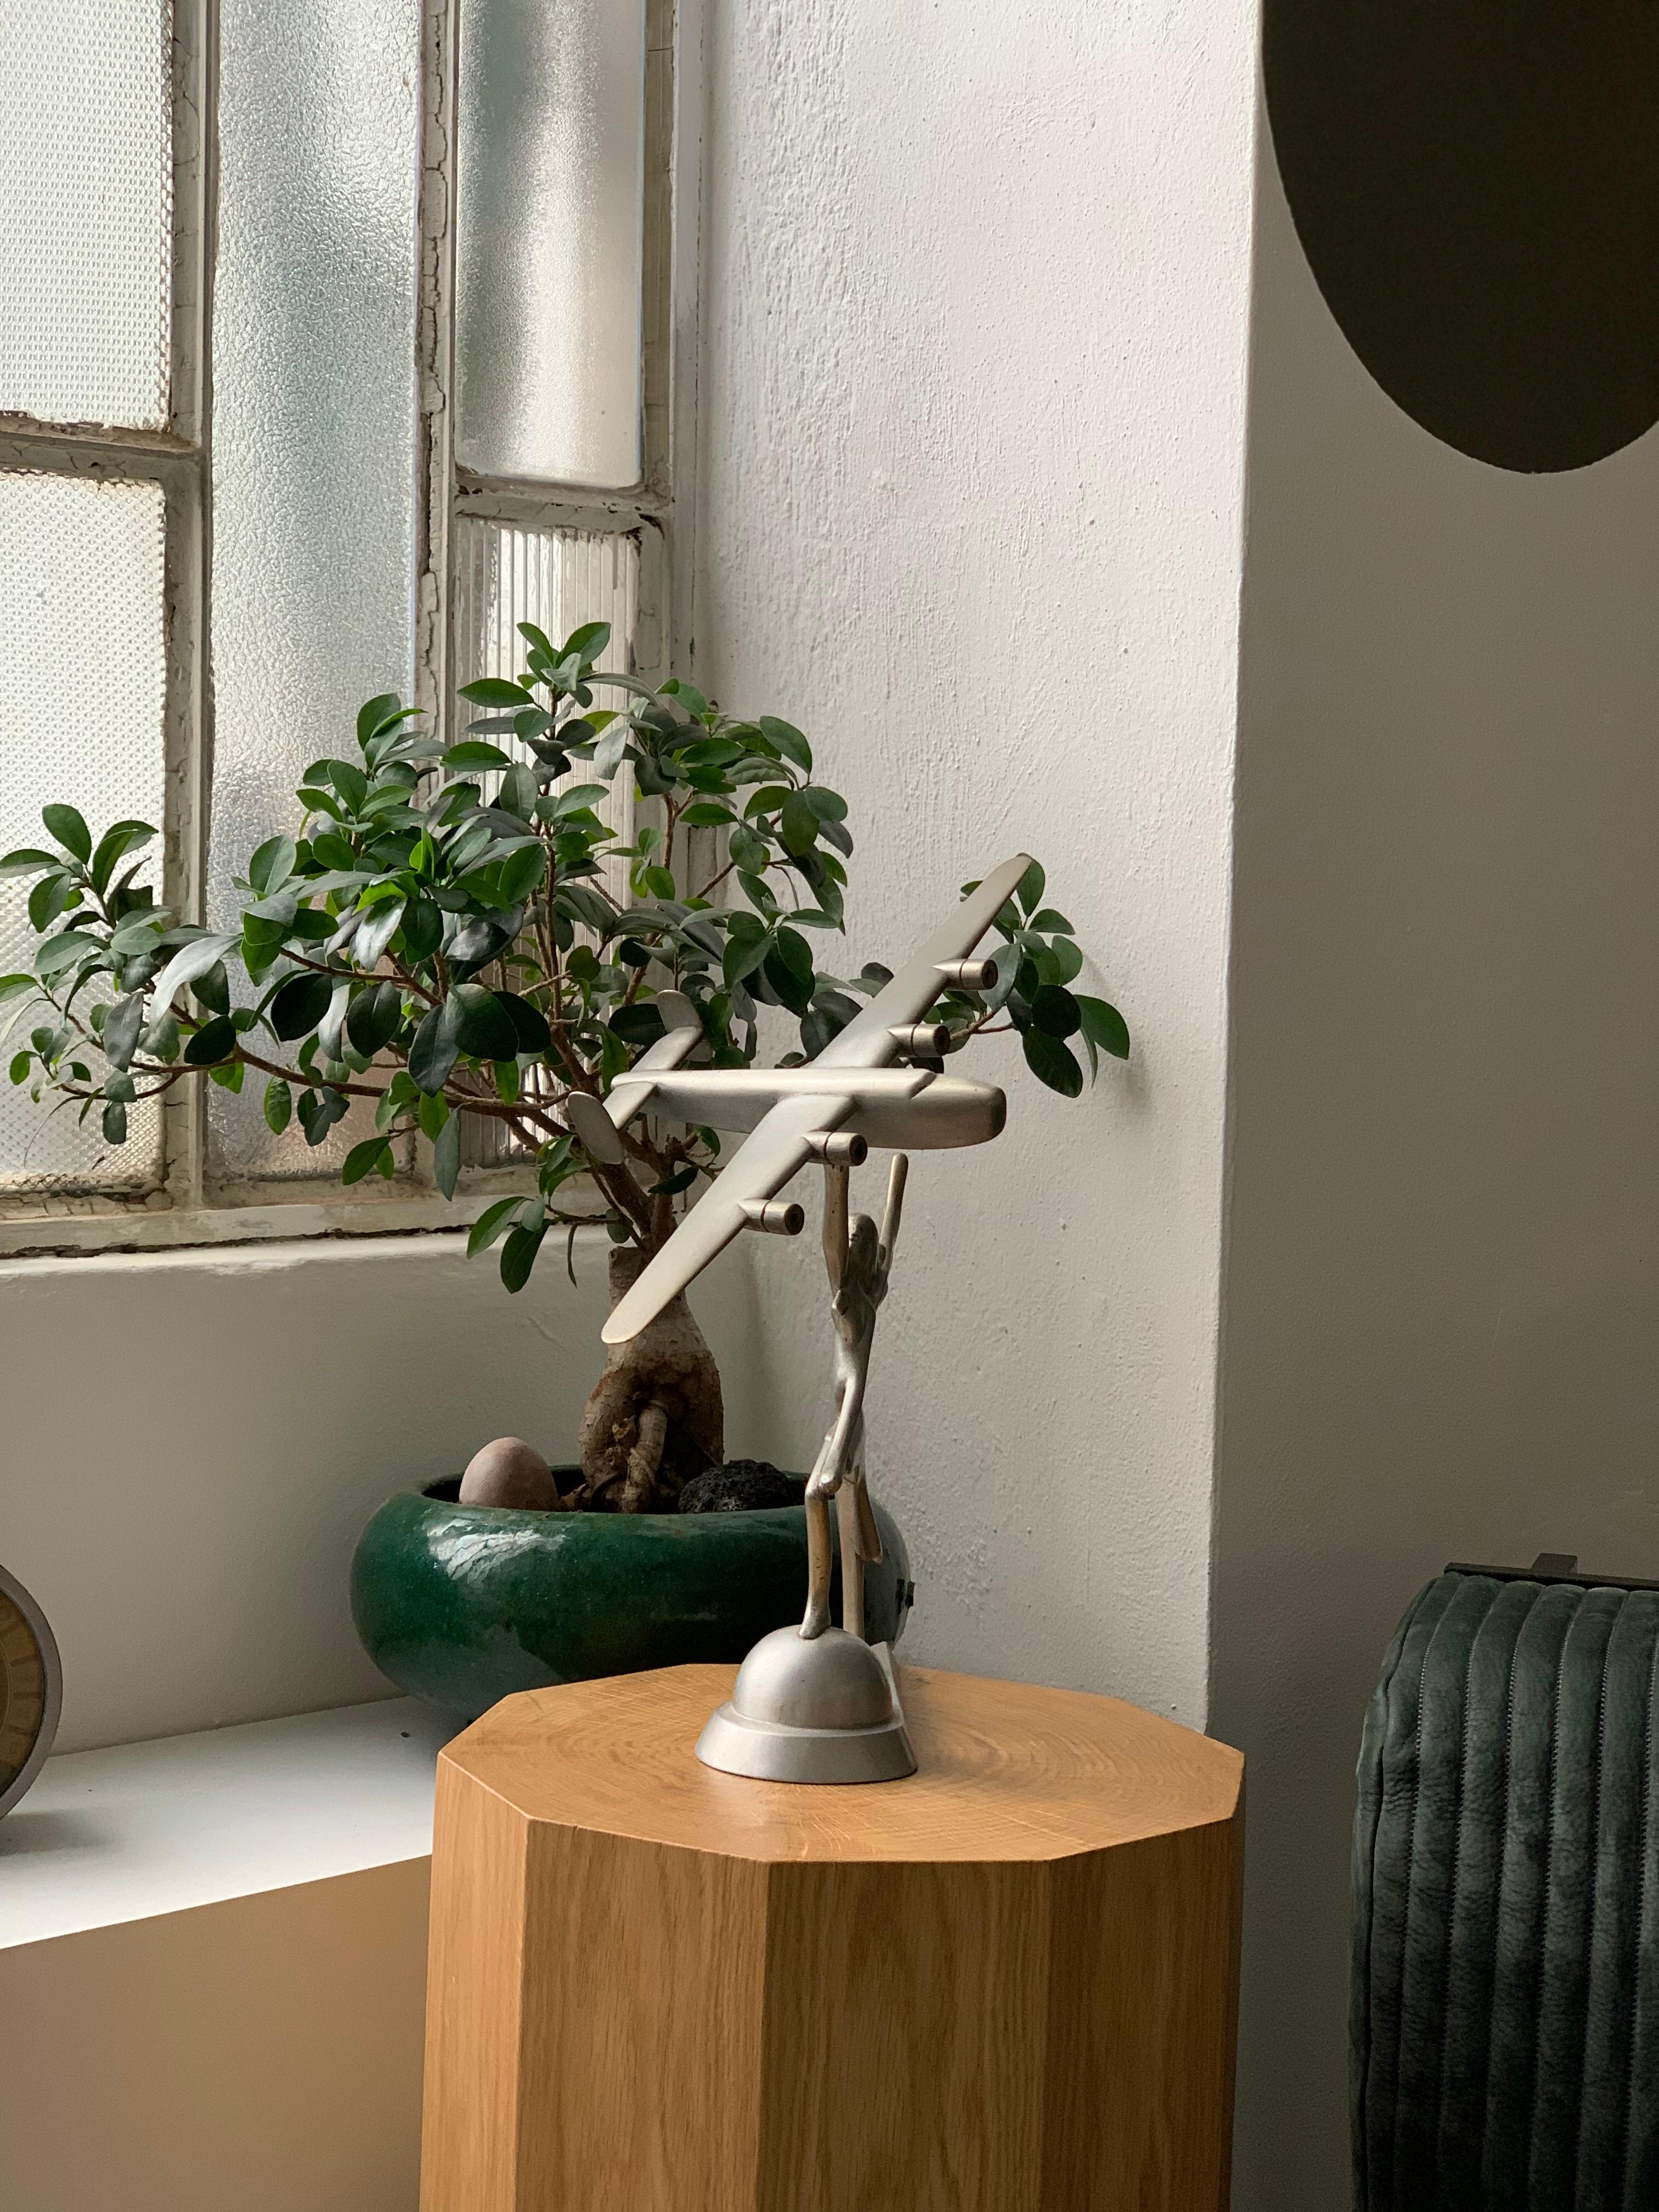 Coming from the house of an Italian WW2 Veteran, the present object is a decorative desk sculpture representing a goddess, possibly Minerva, holding in her hand a faithful reproduction of a Consolidated B-24 